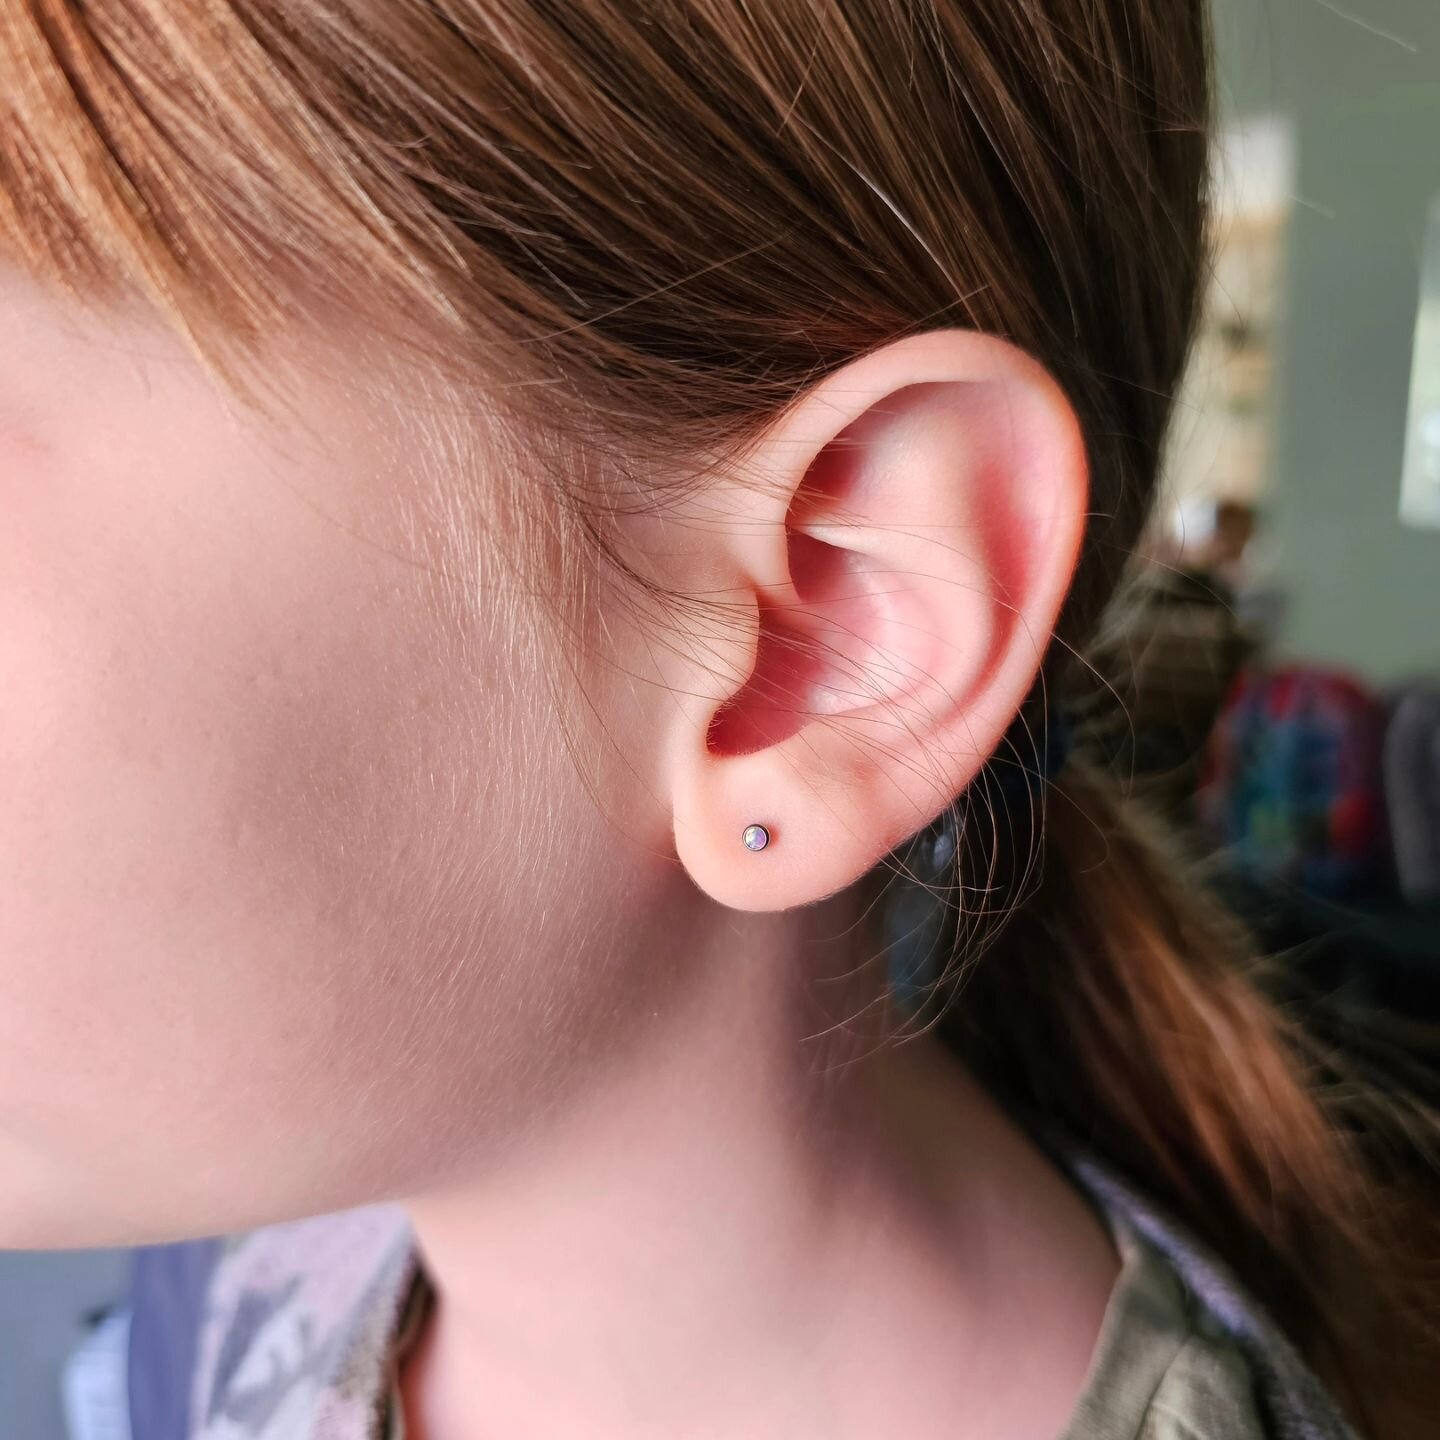 First lobes for this cutie! I'm so glad to be a trusted place to bring your littles. This is such a big deal and one of the reasons I got into piercing! Hoping my daughter will have me do hers someday ✨️ but no pressure here! It's a choice and I stan